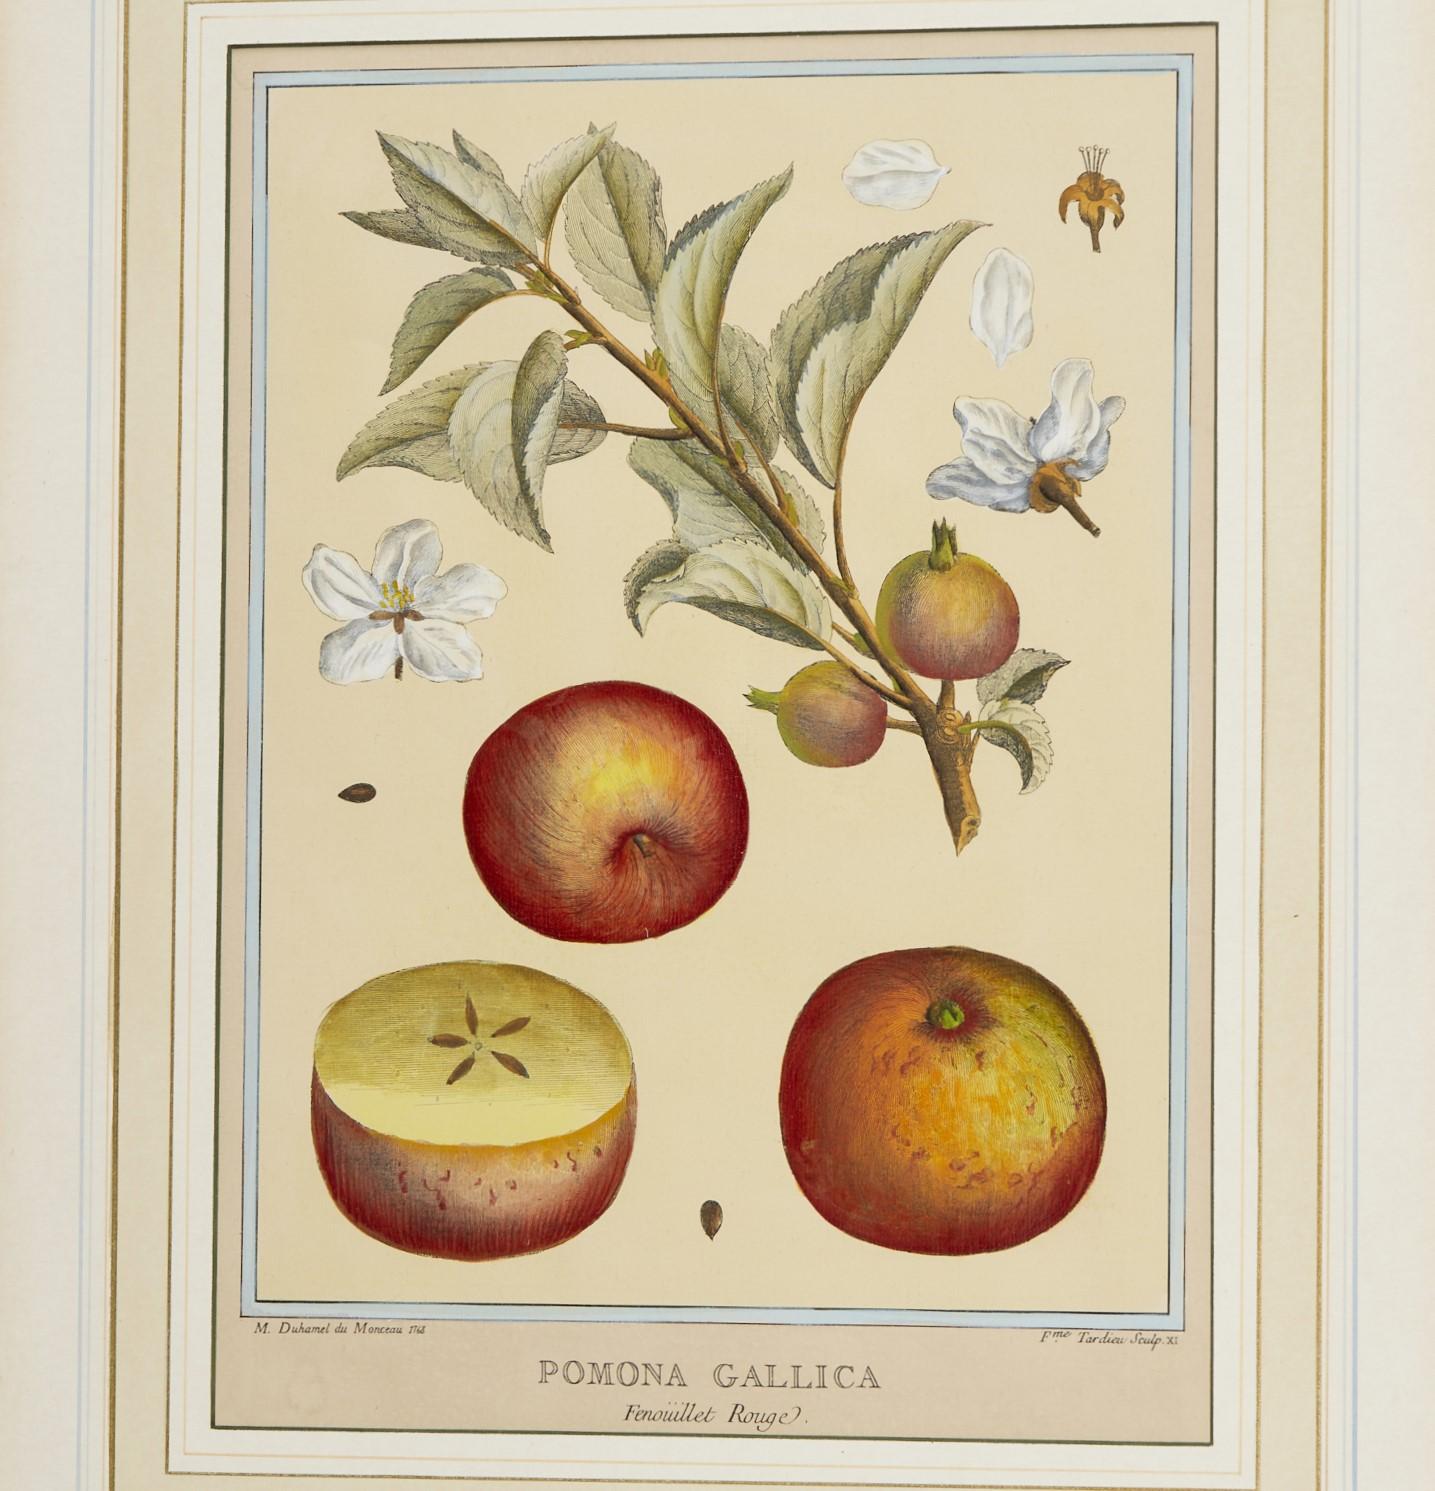 After Henri-Louis Duhamel du Monceau (French, 1700-1782), 6 hand- colored prints, likely 20th c. reproductions. From the botany book titled 